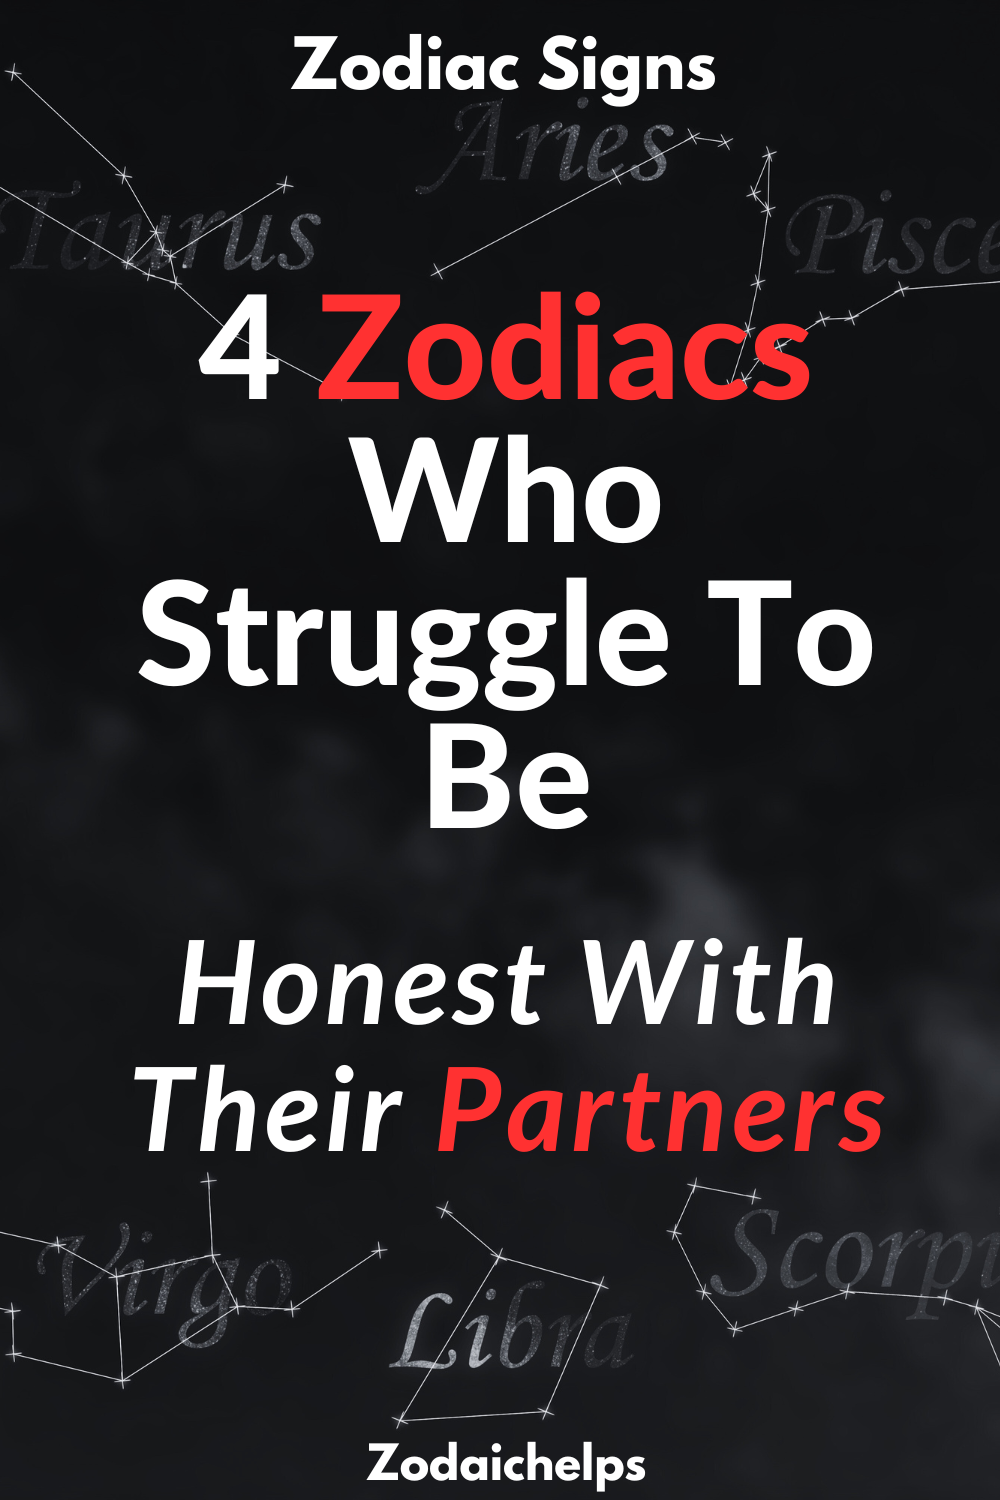 4 Zodiacs Who Struggle To Be Honest With Their Partners